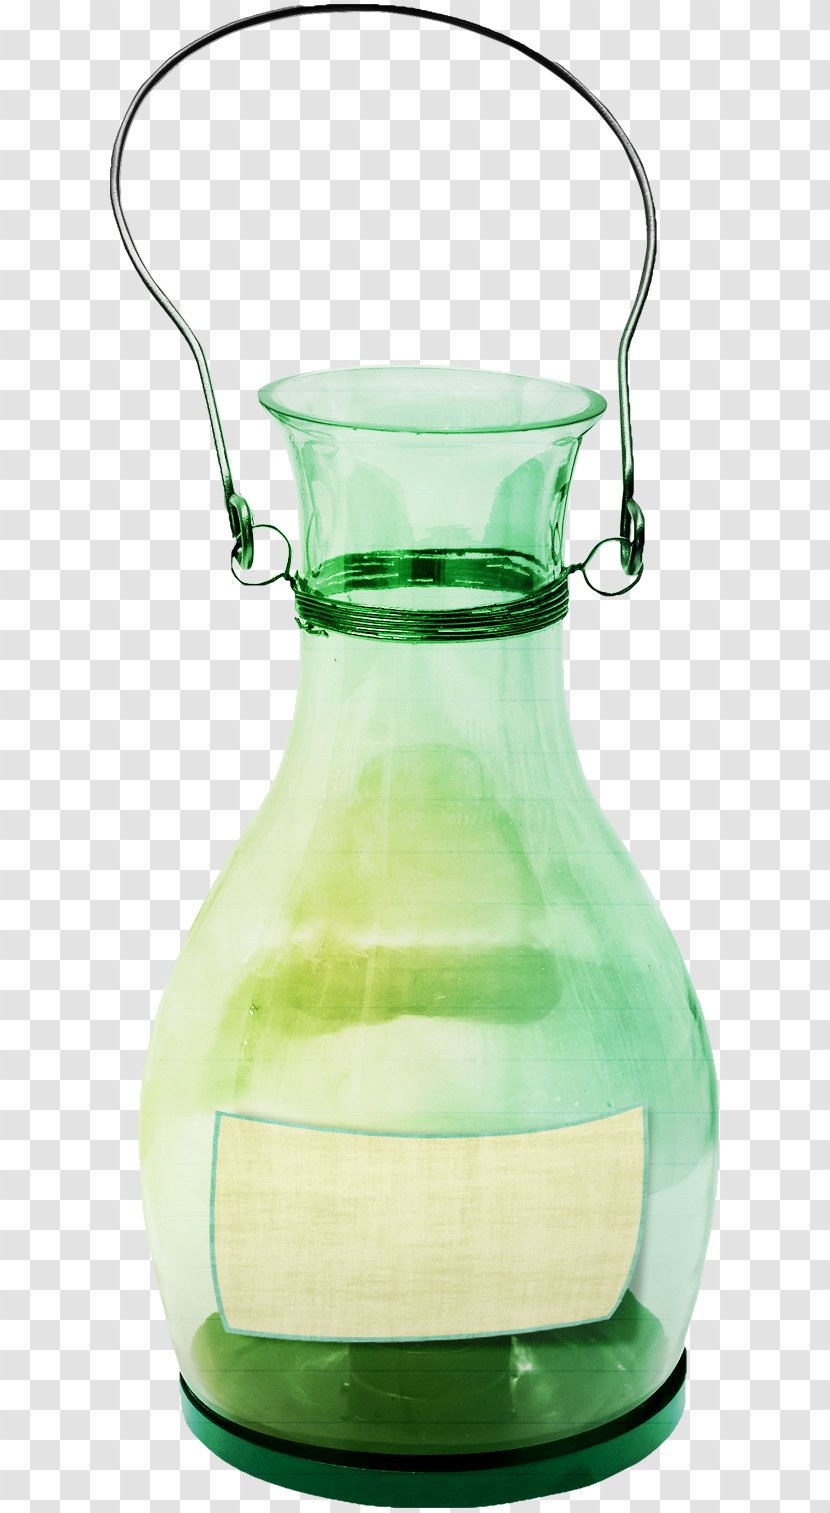 Glass Bottle Transparency And Translucency - Water Bottles - Green Transparent Transparent PNG